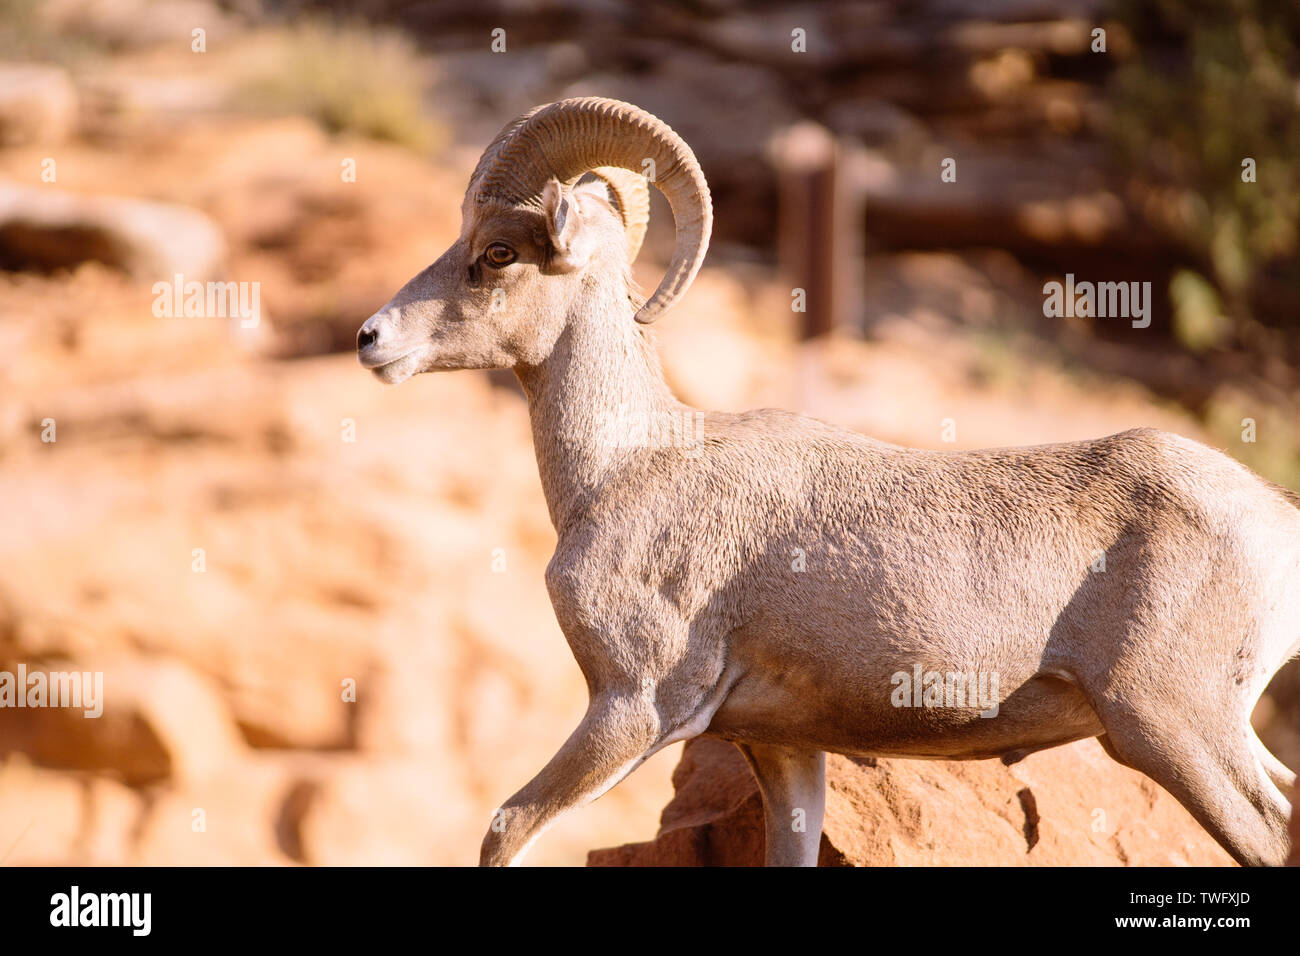 Close-up of a Desert Bighorn Ram, Zion National Park, Utah, United States Stock Photo